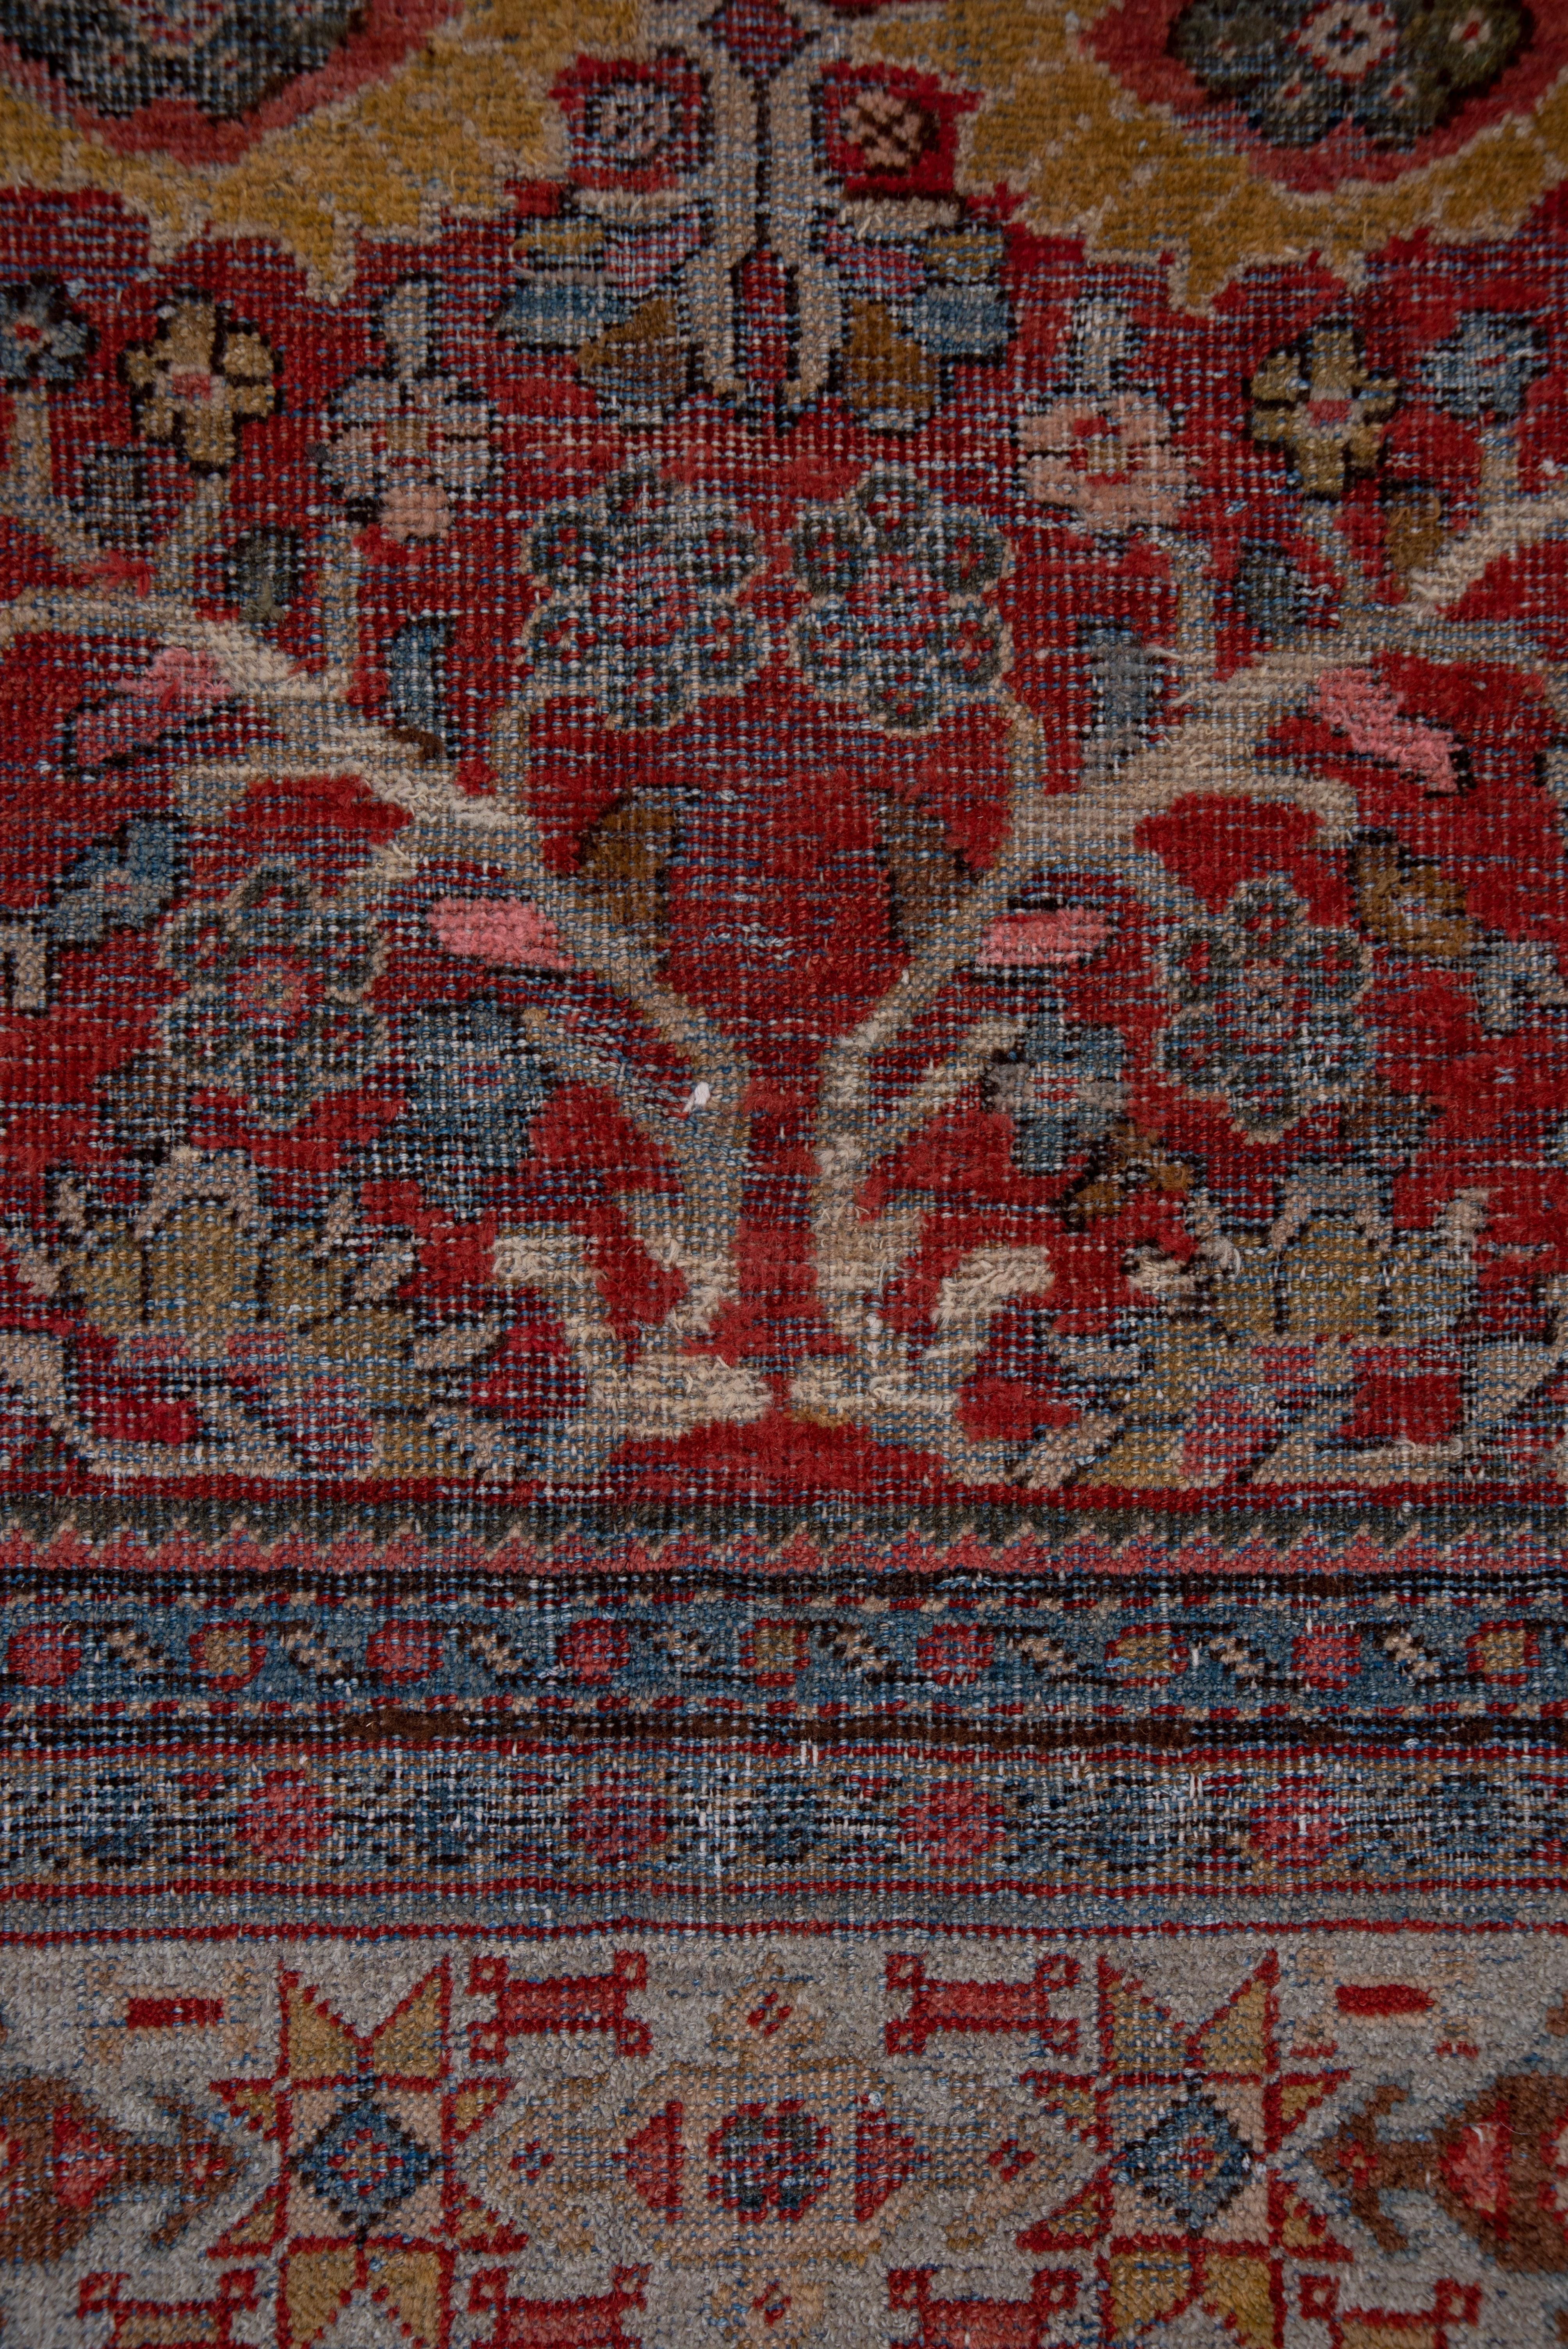 This coarsely woven, boldly patterned west Persian rustic carpet displays an octagonal red field with a rosette, palmette and thick tendril segment pattern within powder blue gray corners and a tonally matching border of stars and arrow headed